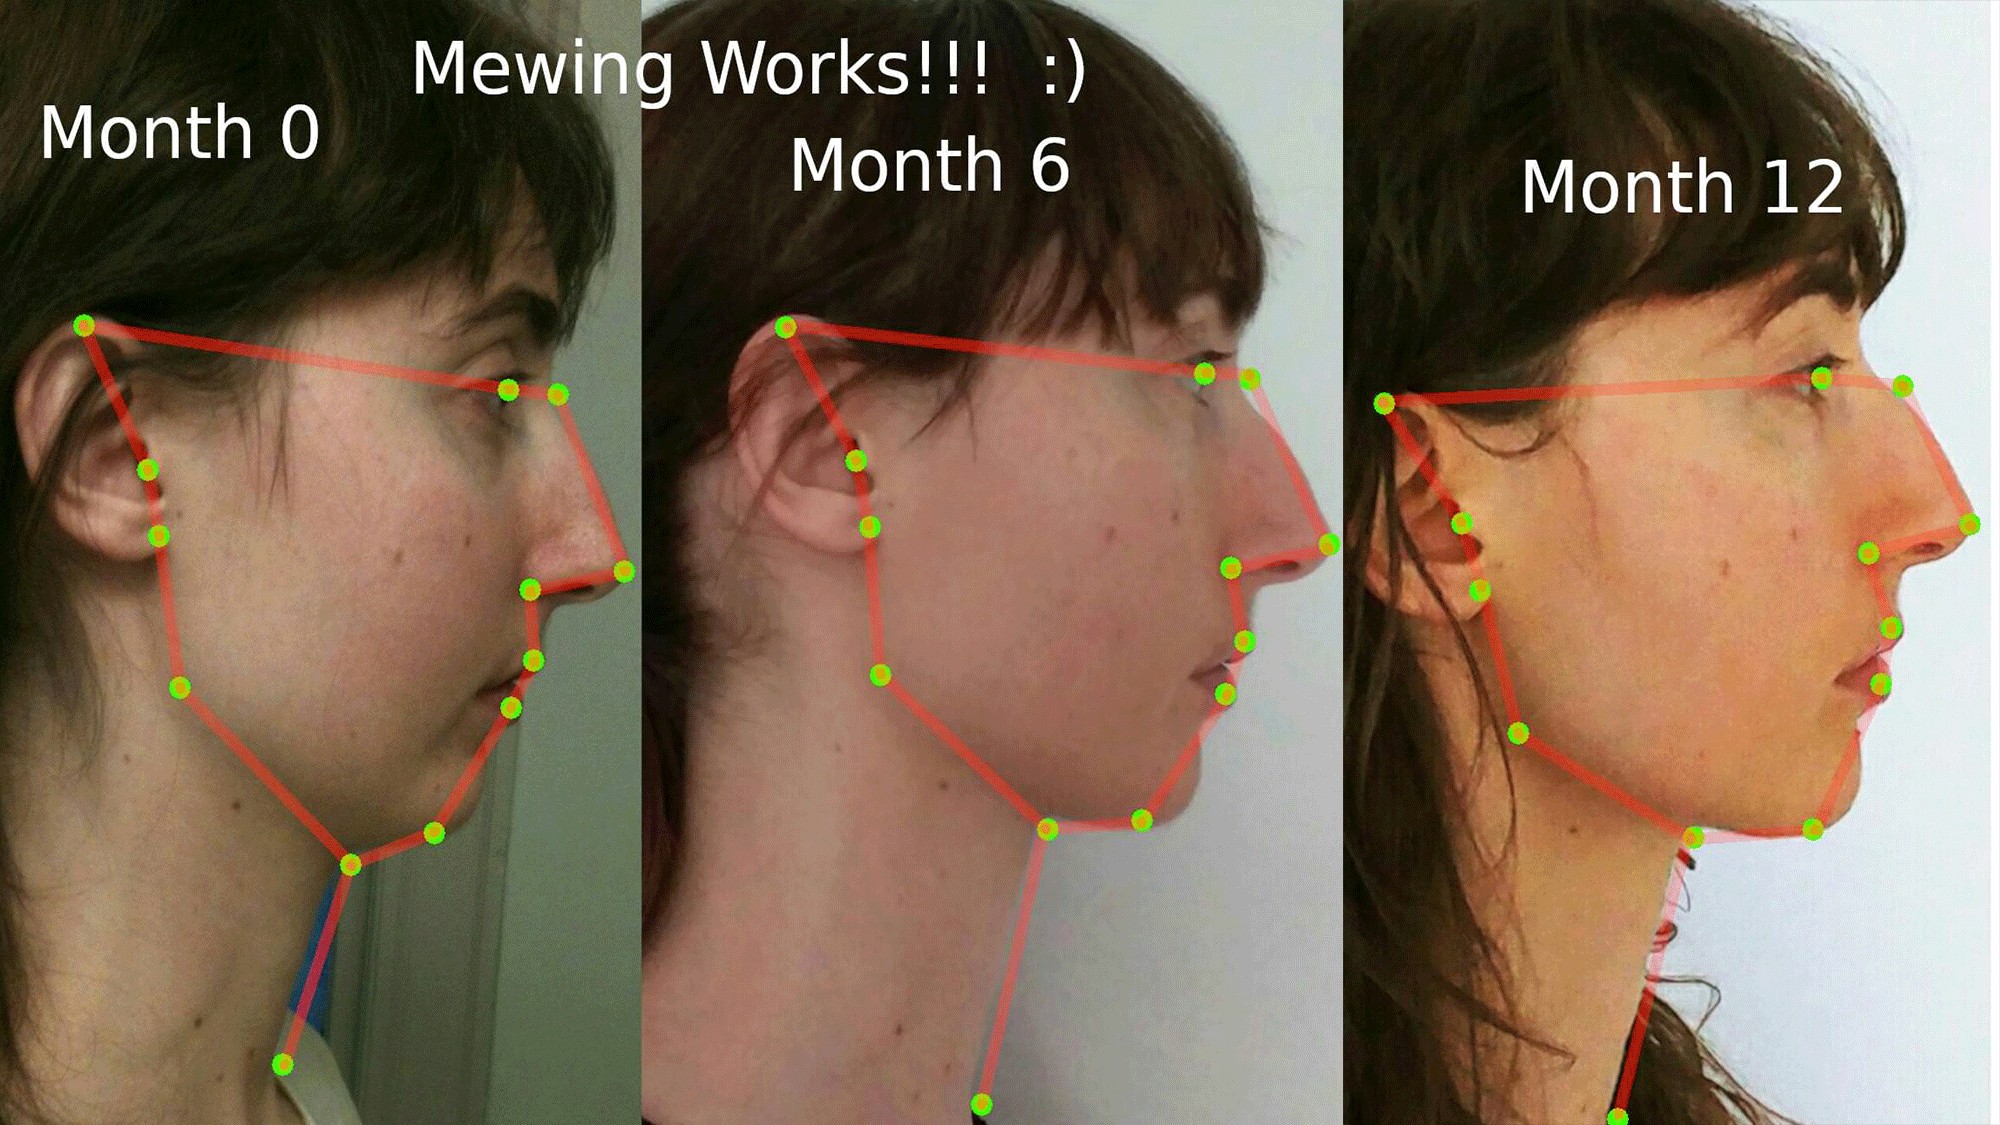 What Is Mewing? Does It Really Work?